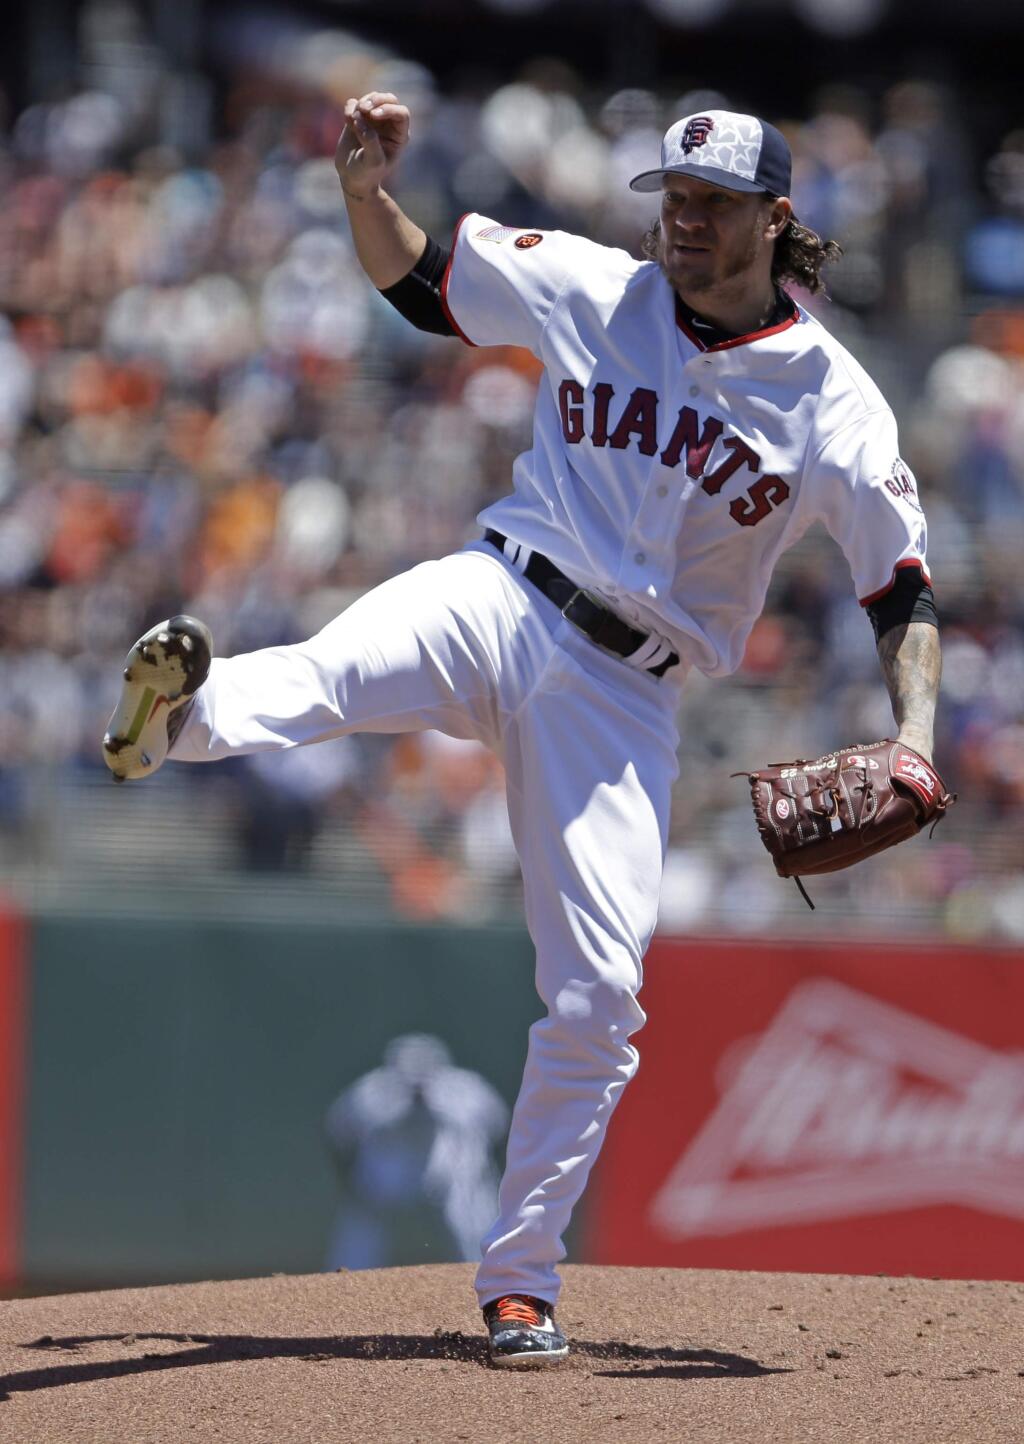 San Francisco Giants pitcher Jake Peavy works against the Colorado Rockies in the first inning of a baseball game Monday, July 4, 2016, in San Francisco. (AP Photo/Ben Margot)